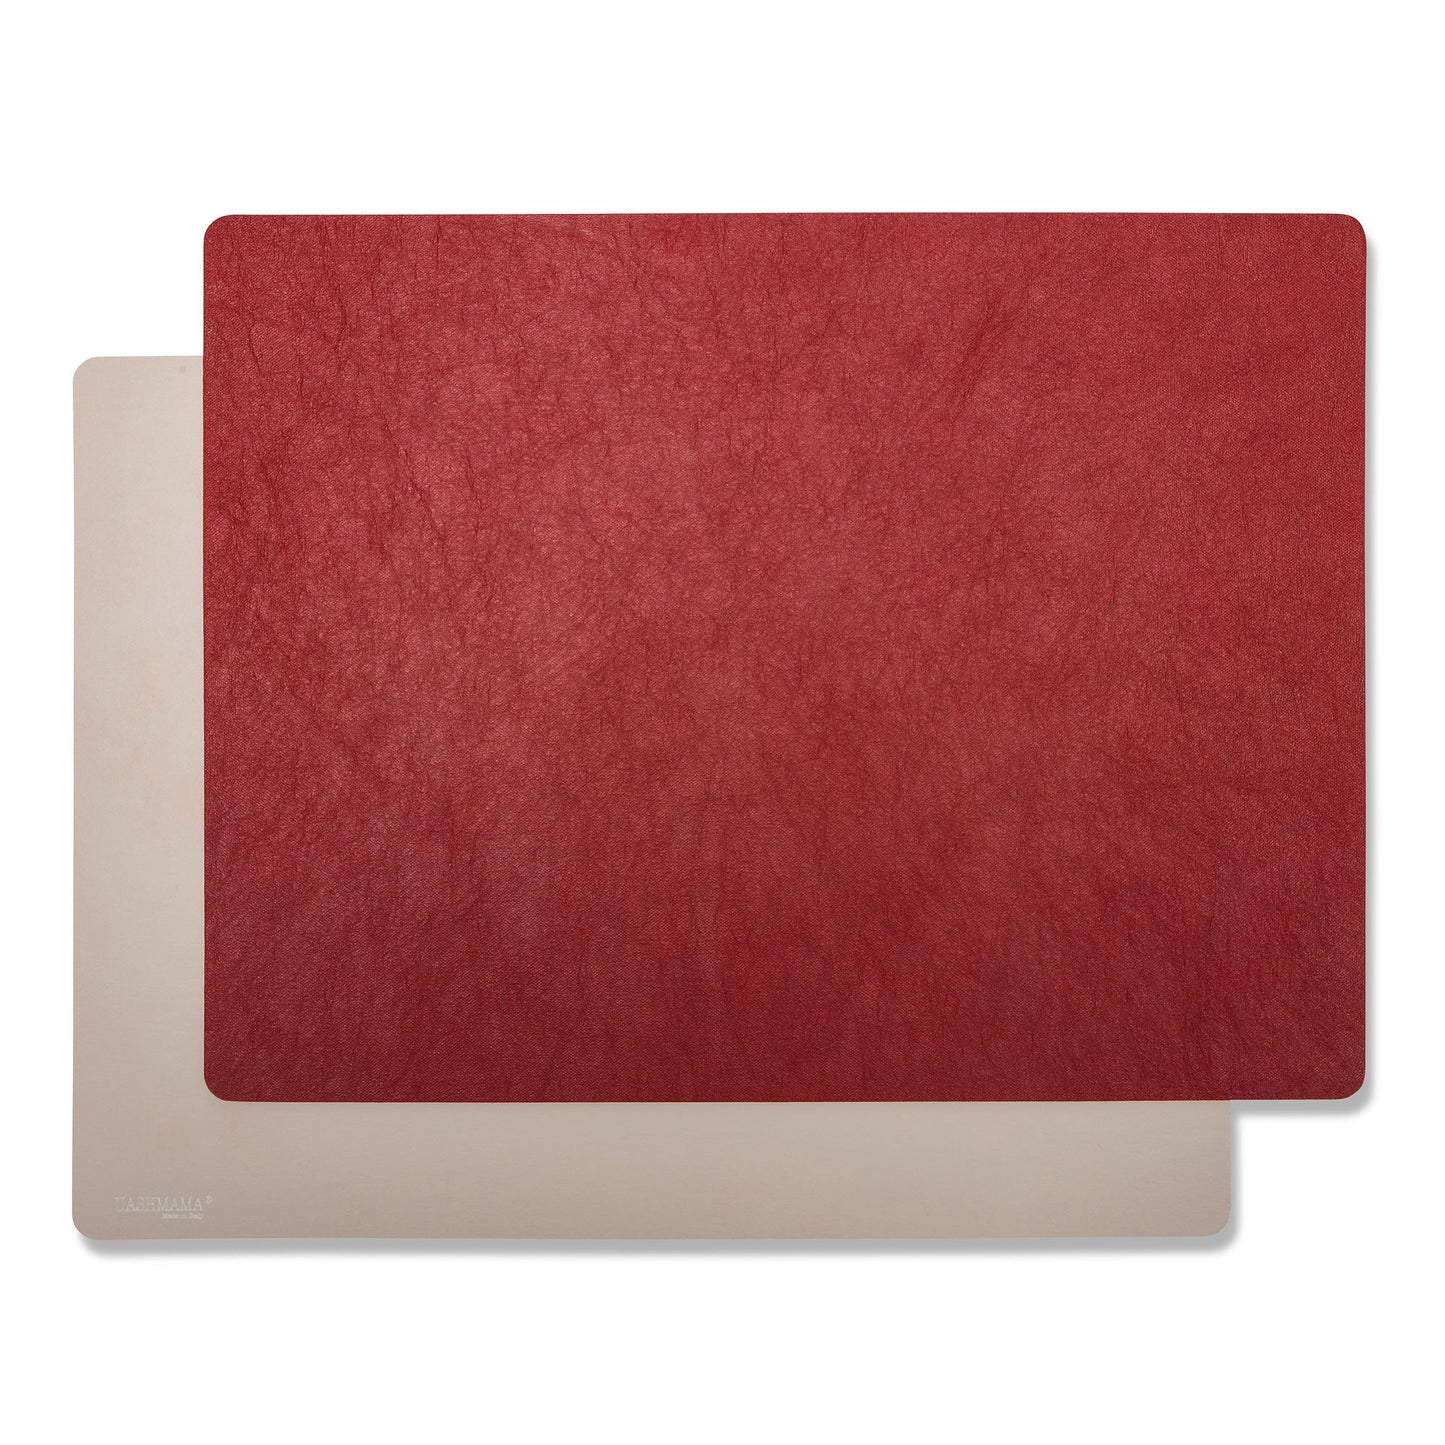 Two rectangular washable paper placemats are stacked one on top of the other. The one in the foreground is red and the one at rear is beige.